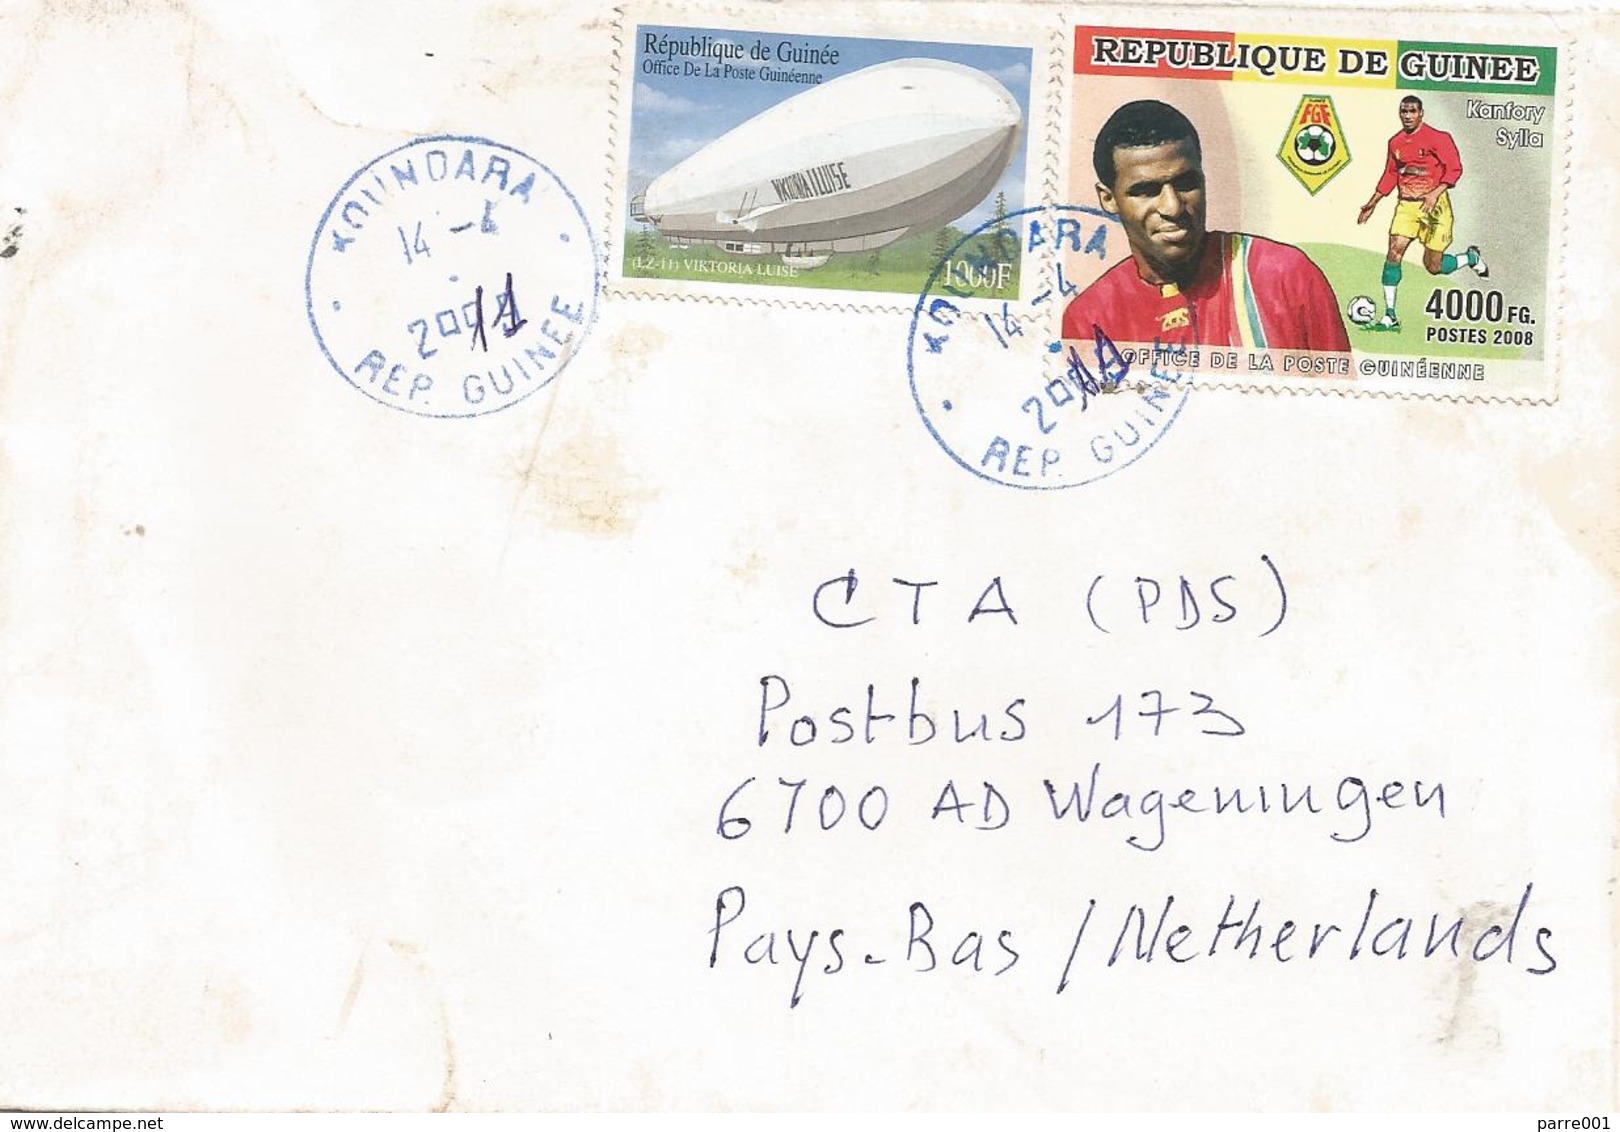 Guinea Guinee 2011 Koundara Football African Nations Cup Kanfory Sylla Cover - Afrika Cup